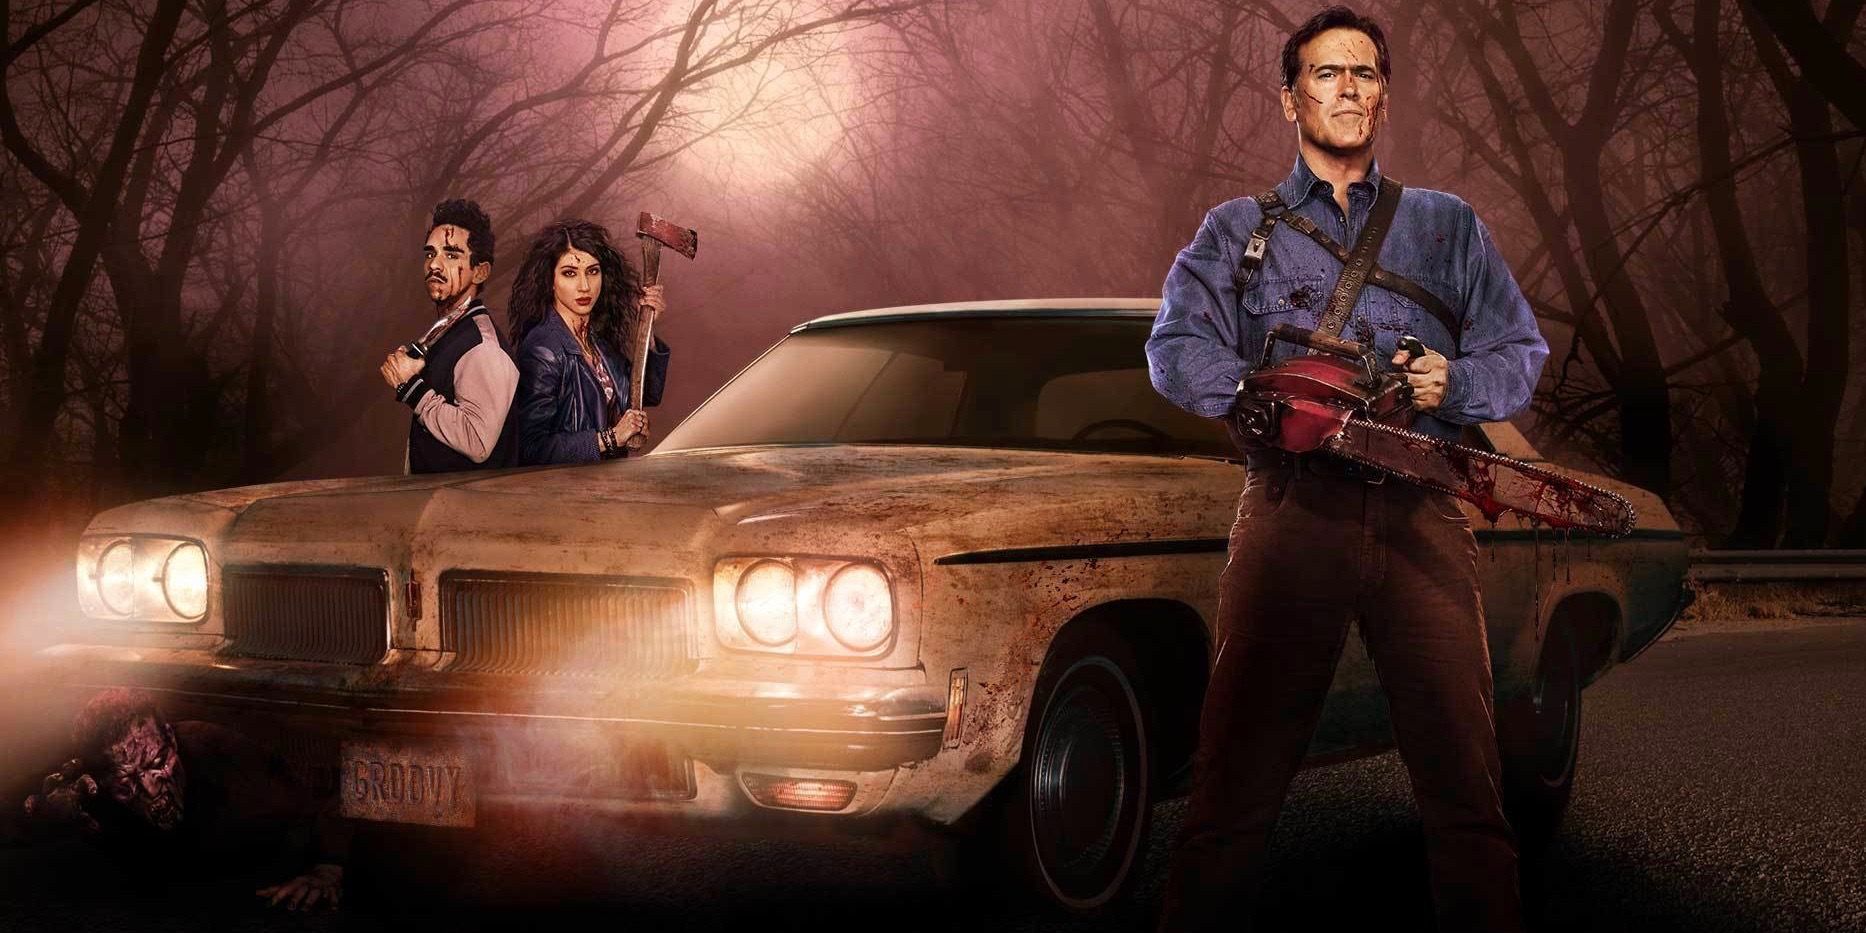 IMDb - Big Evil Dead fan? Comment below with your best Ash one-liner for a  chance to win tickets to the Ash vs Evil Dead premiere! #AshBash   UPDATE: Congratulations to our